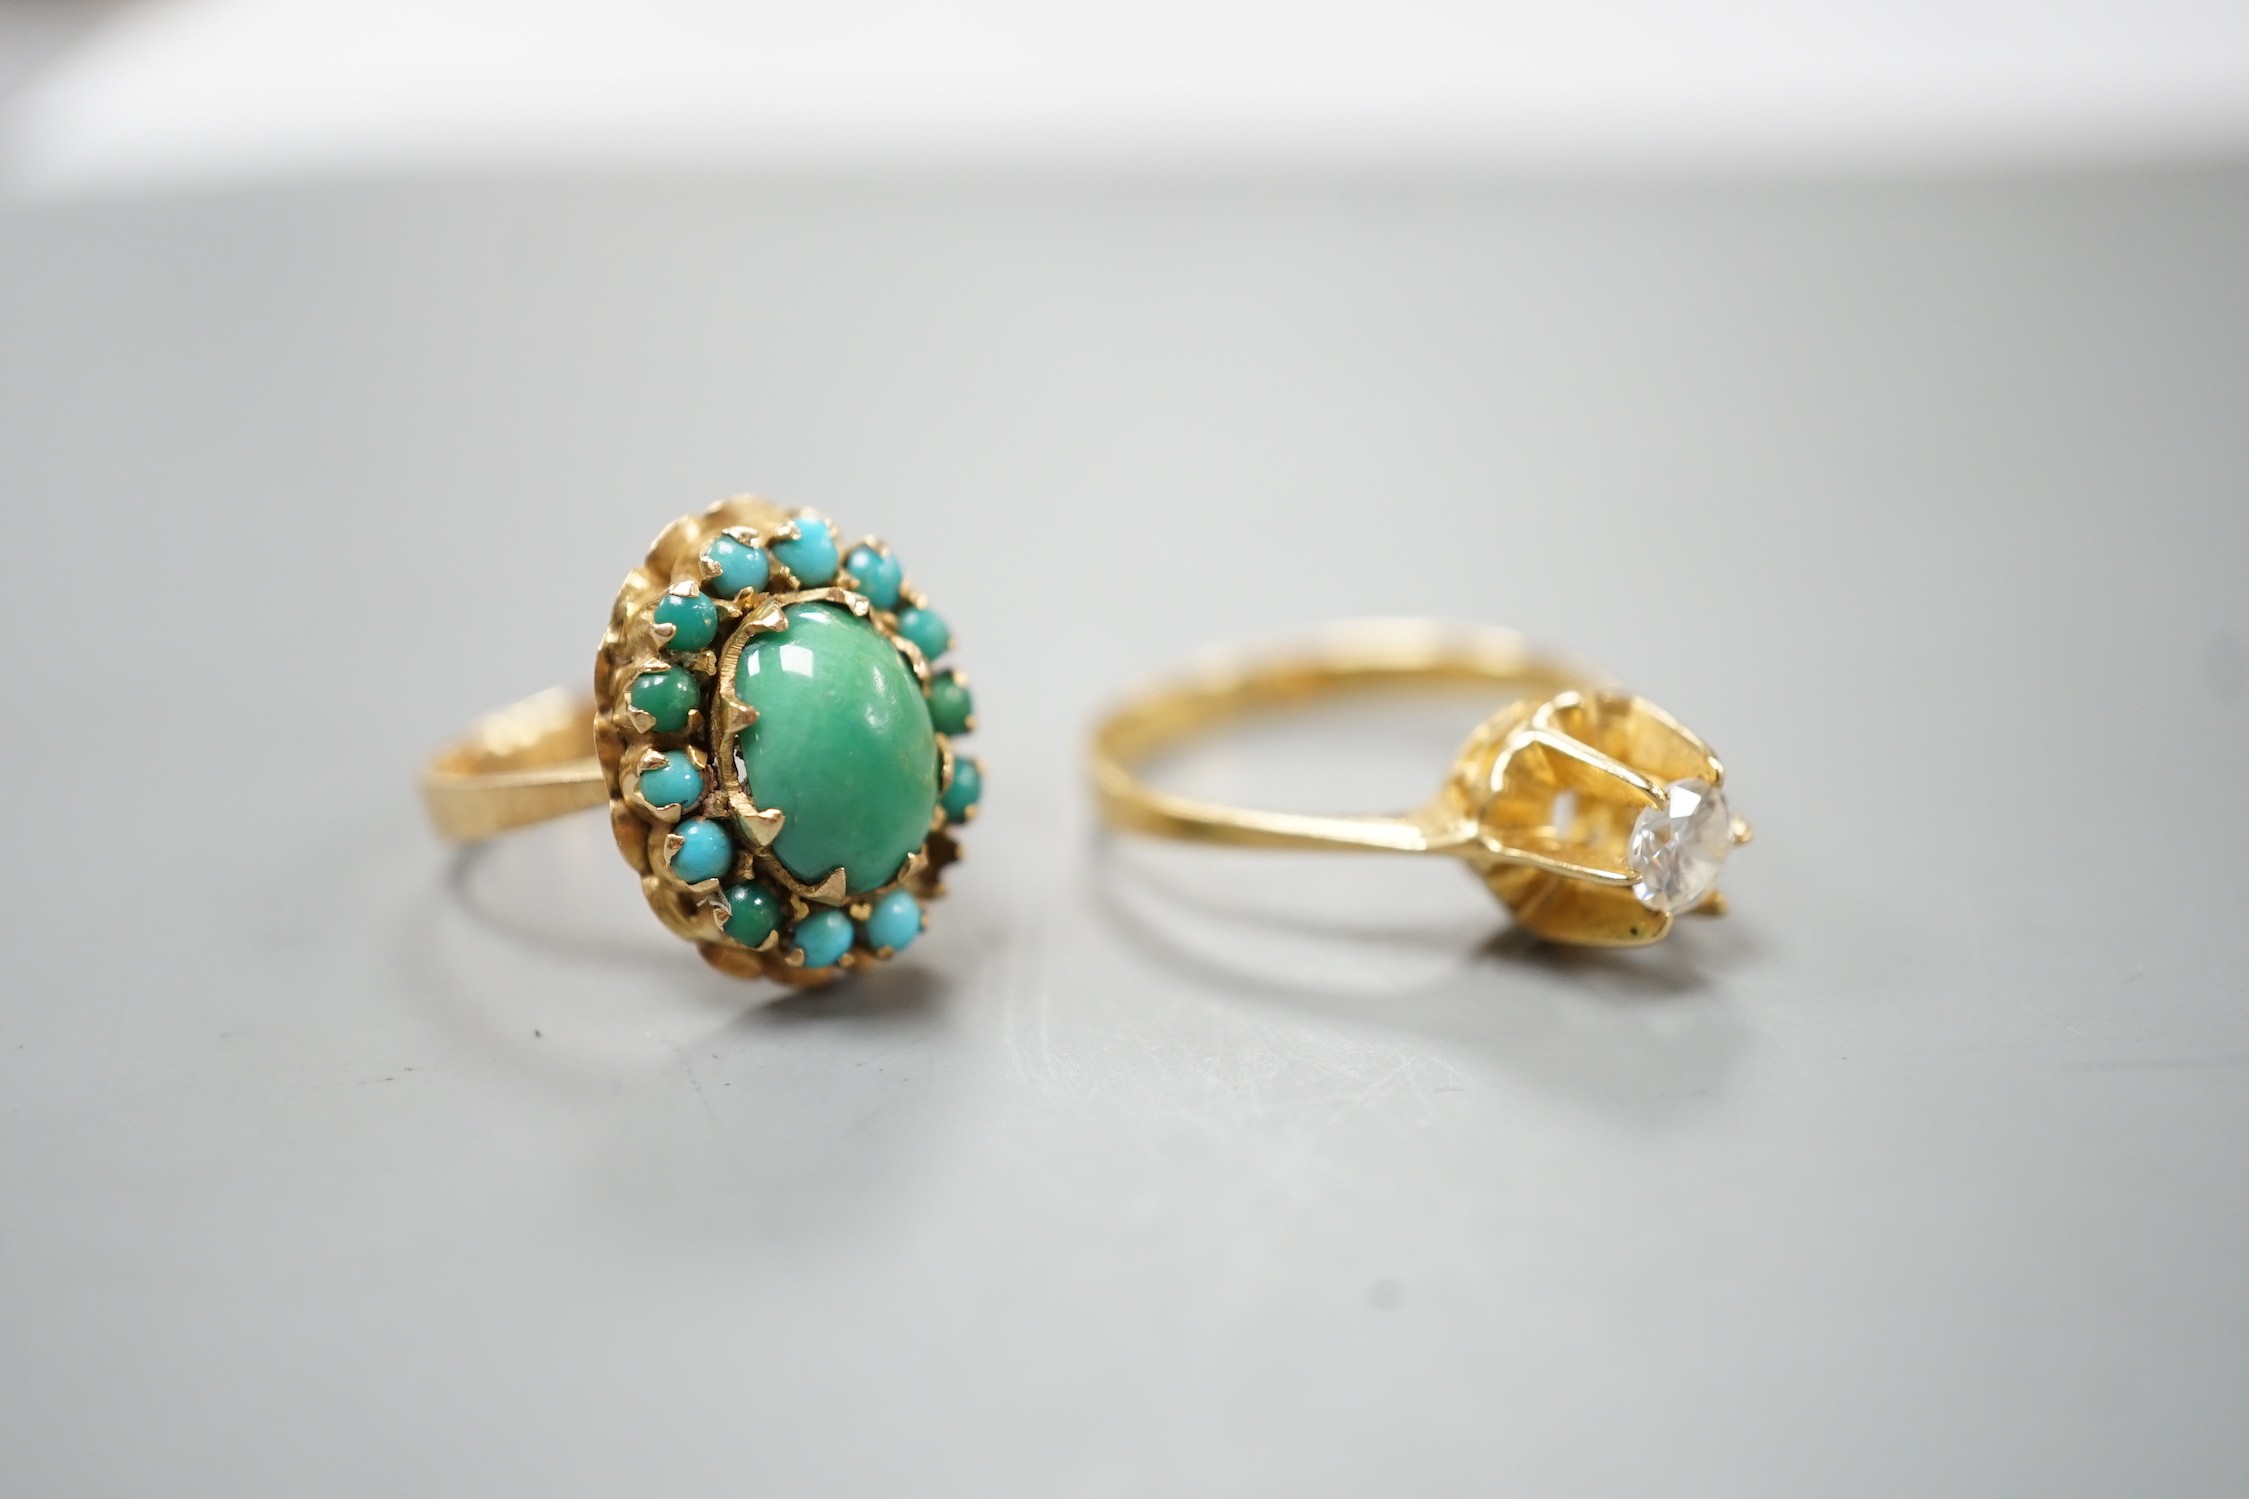 Two 750 yellow metal and gem set rings, turquoise cluster and simulated diamond, gross weight 7.4 grams, (stone missing).